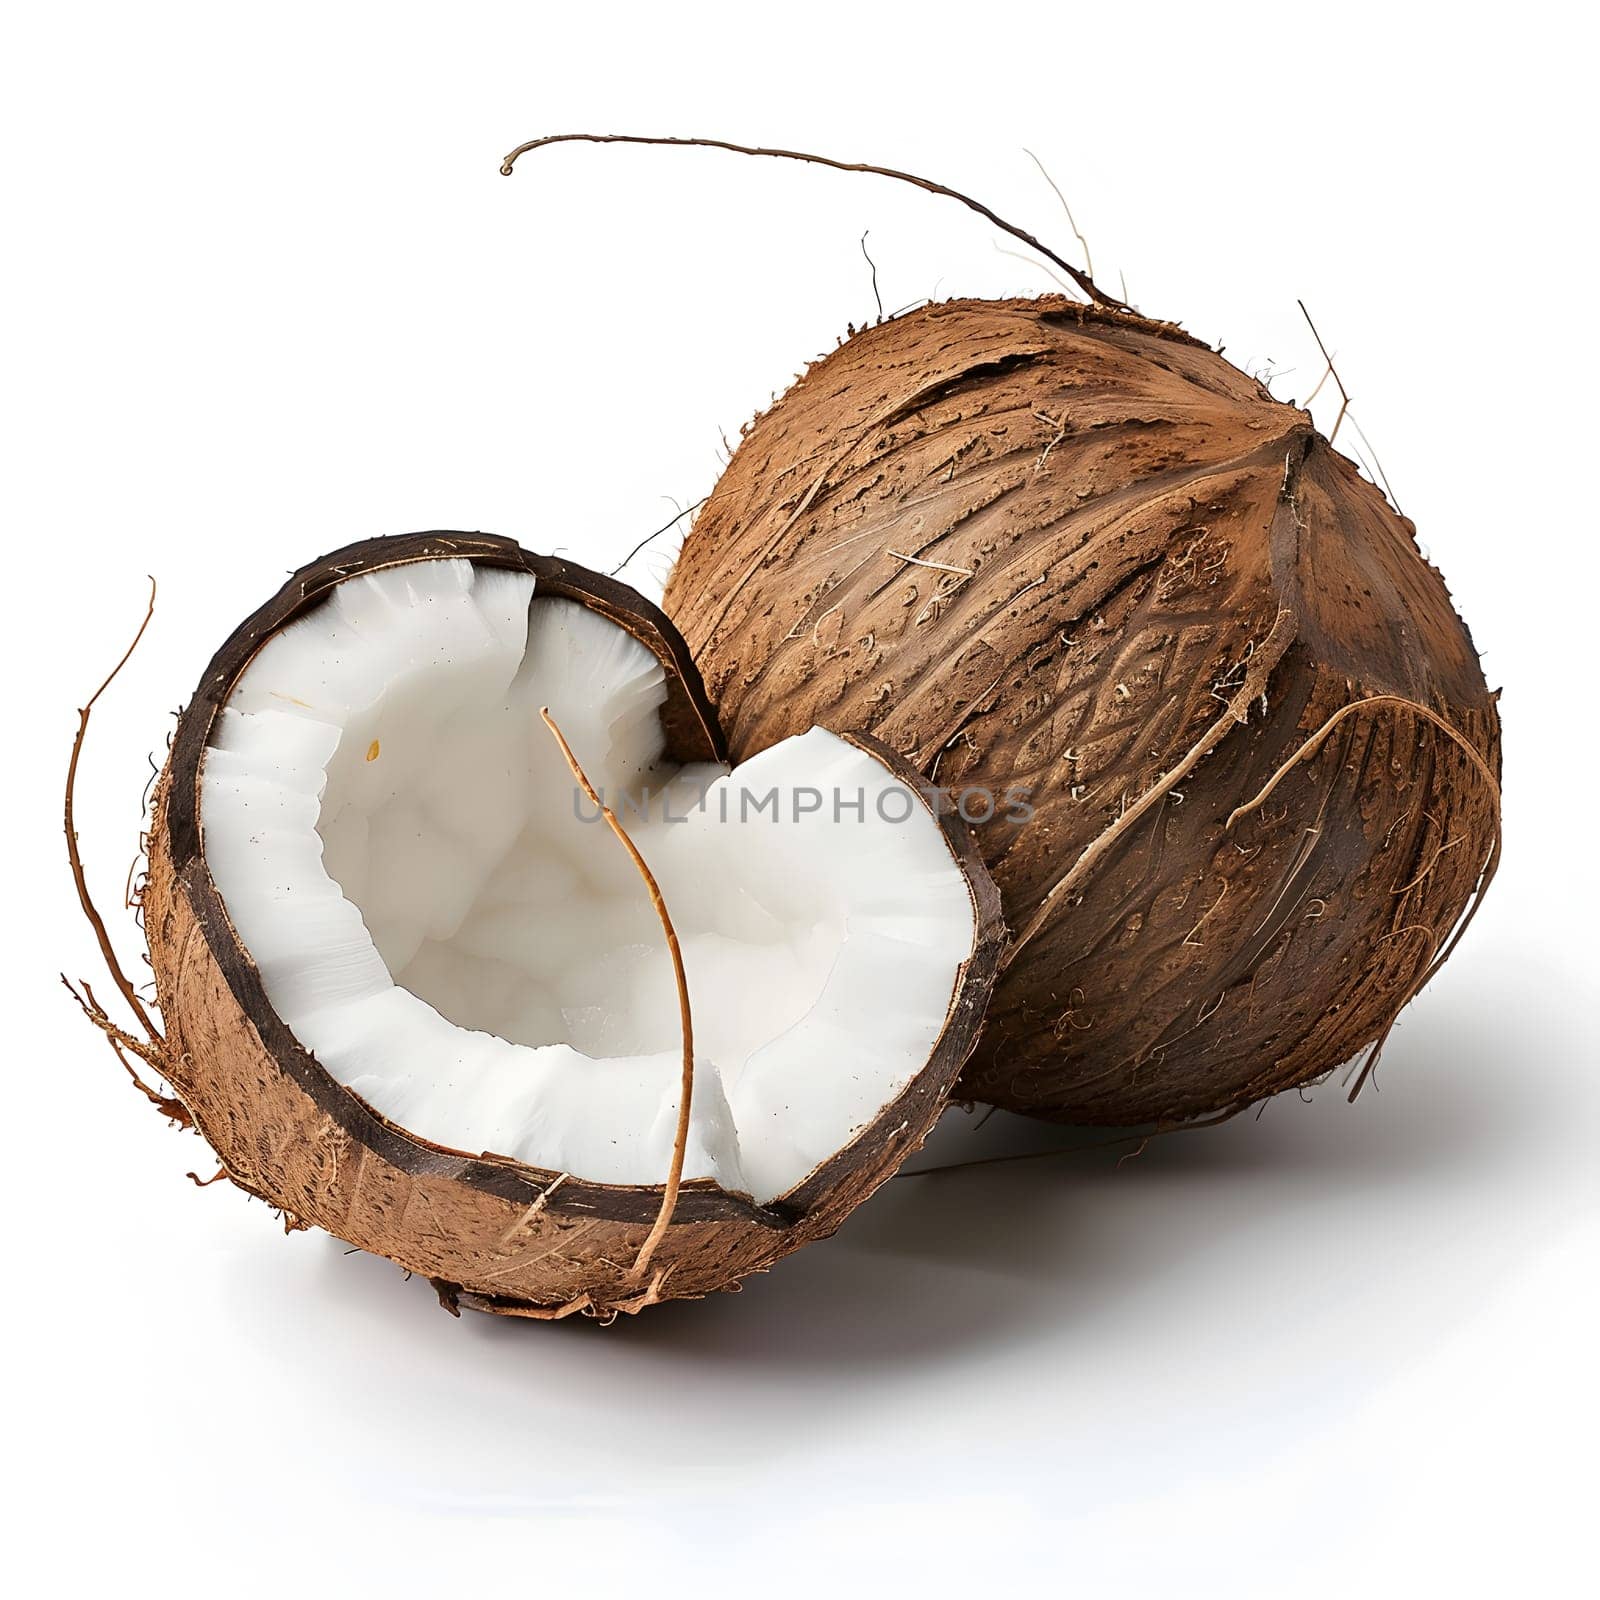 A coconut, a natural food ingredient, is cut in half on a white background, showcasing its plantbased, liverhealthy qualities as a treederived natural material